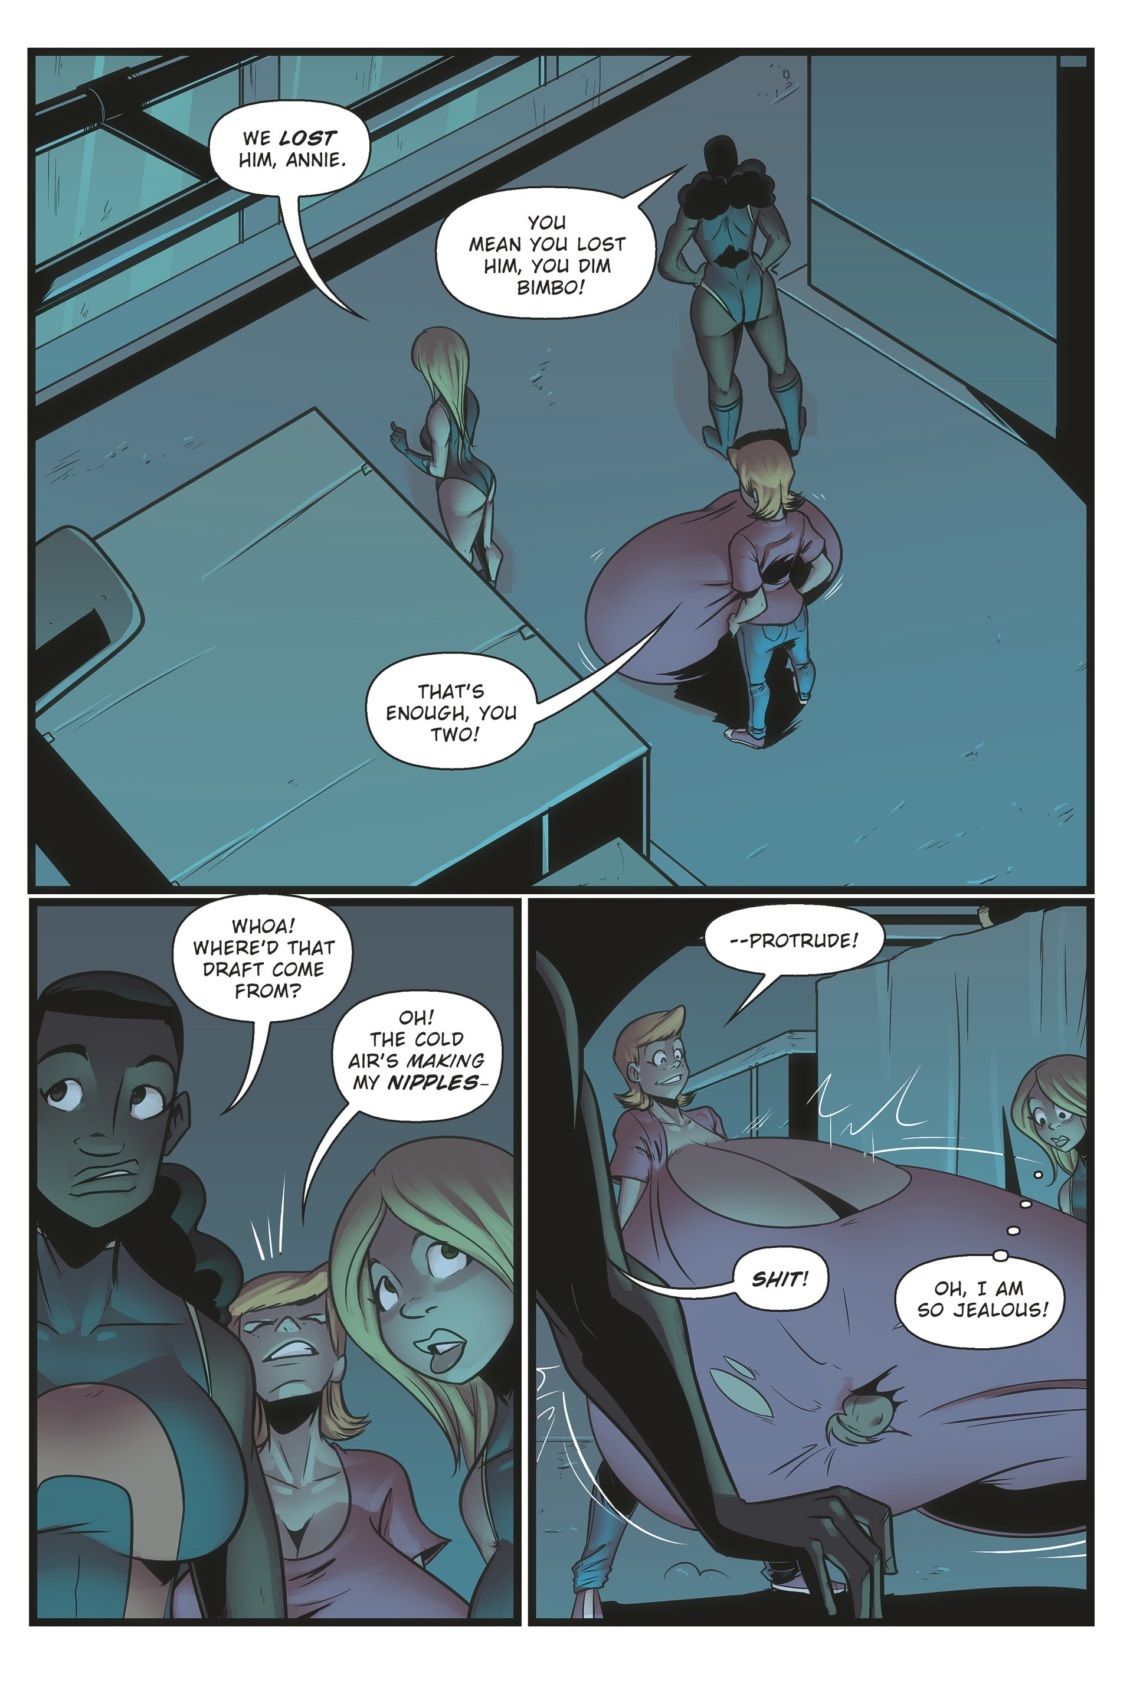 Annie and the Blow-Up Dolls ExpansionFan page 11